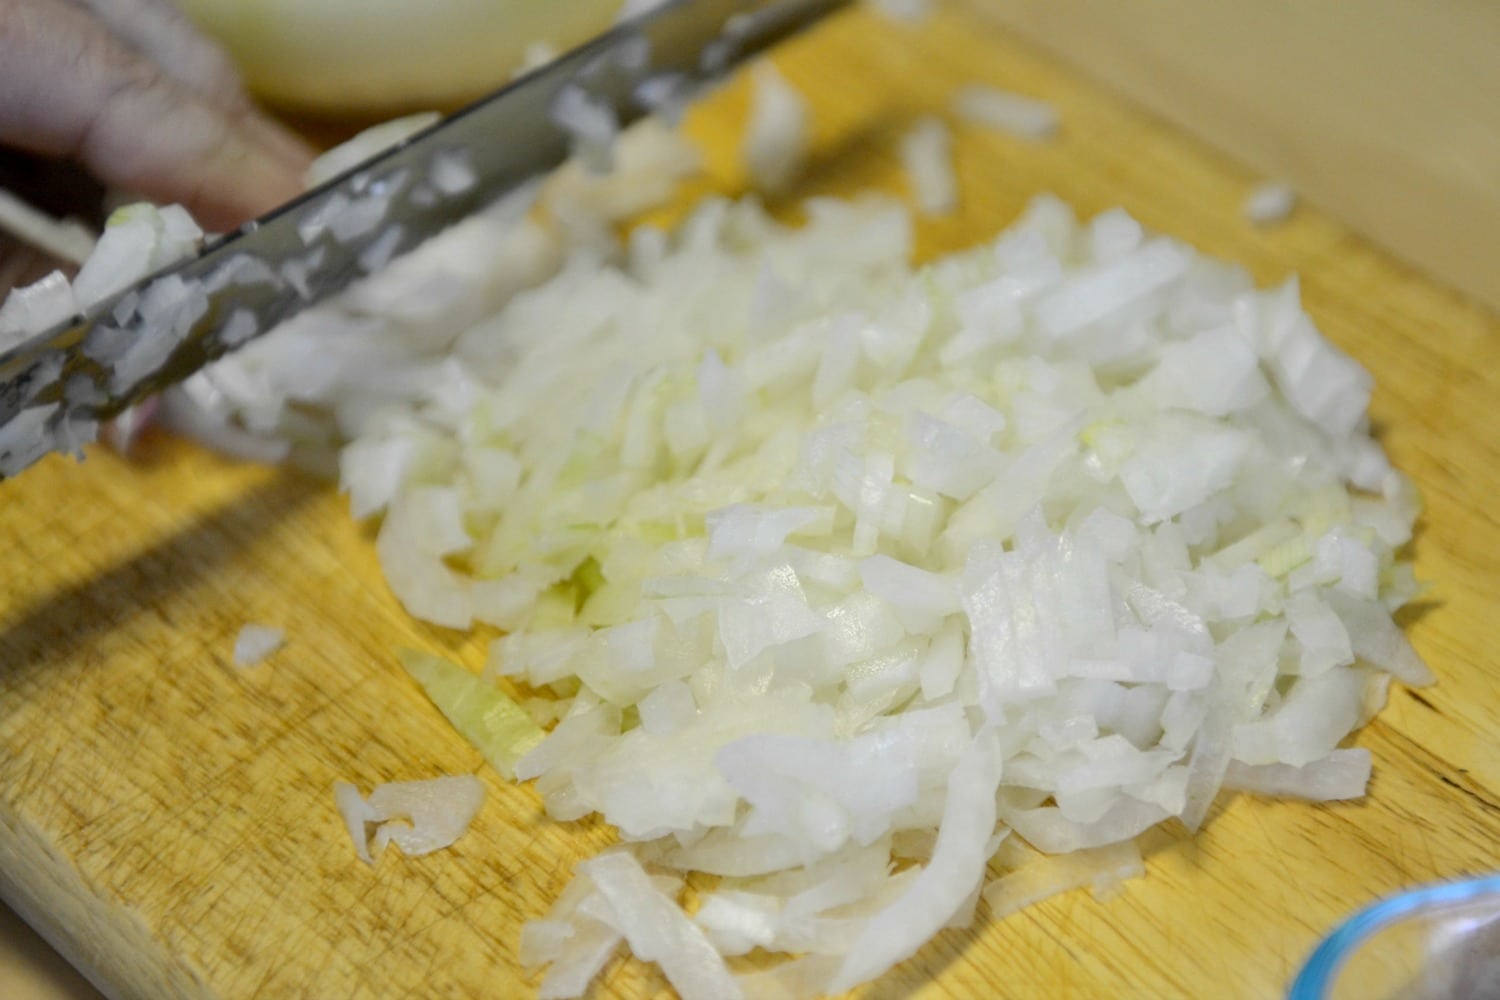 Chop a white onion into finely diced pieces.